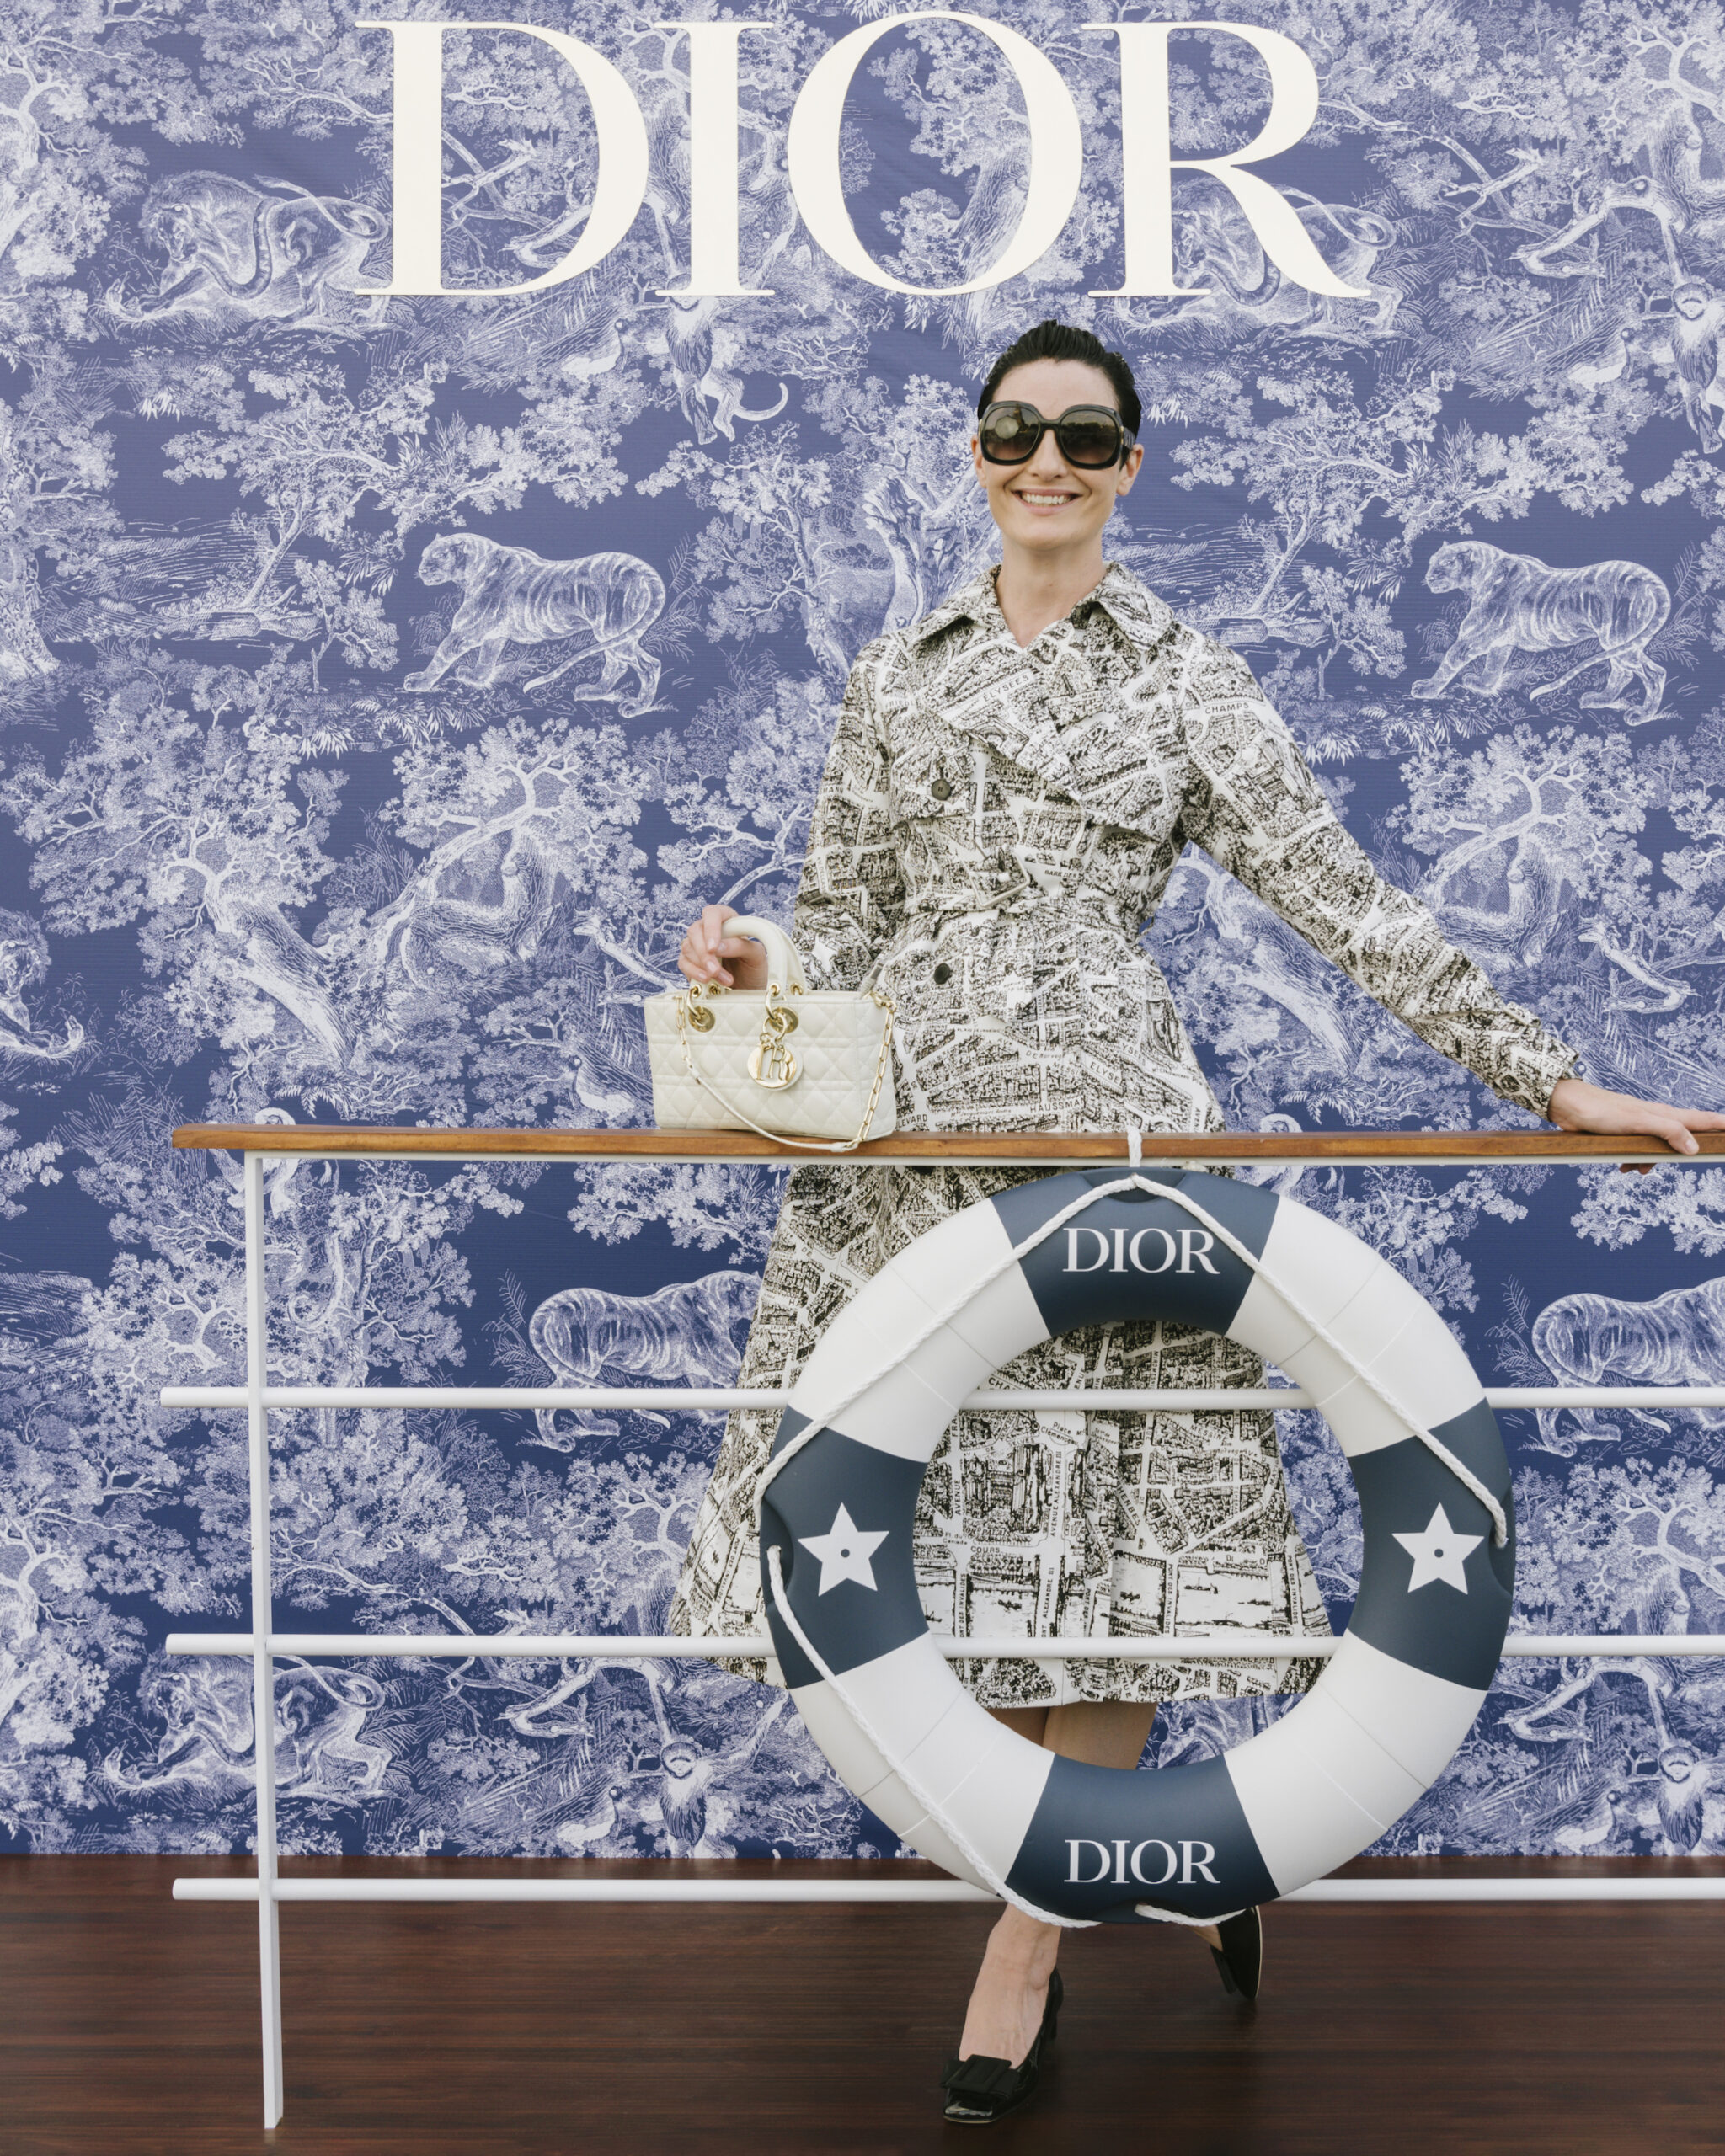 Erin O'Connor in Dior Spring-Summer 2023 Erin O'Connor showcased sophistication in a printed cotton trench-coat from the Dior Spring-Summer 2023 collection. She accessorized with a Dior bag and sunglasses.